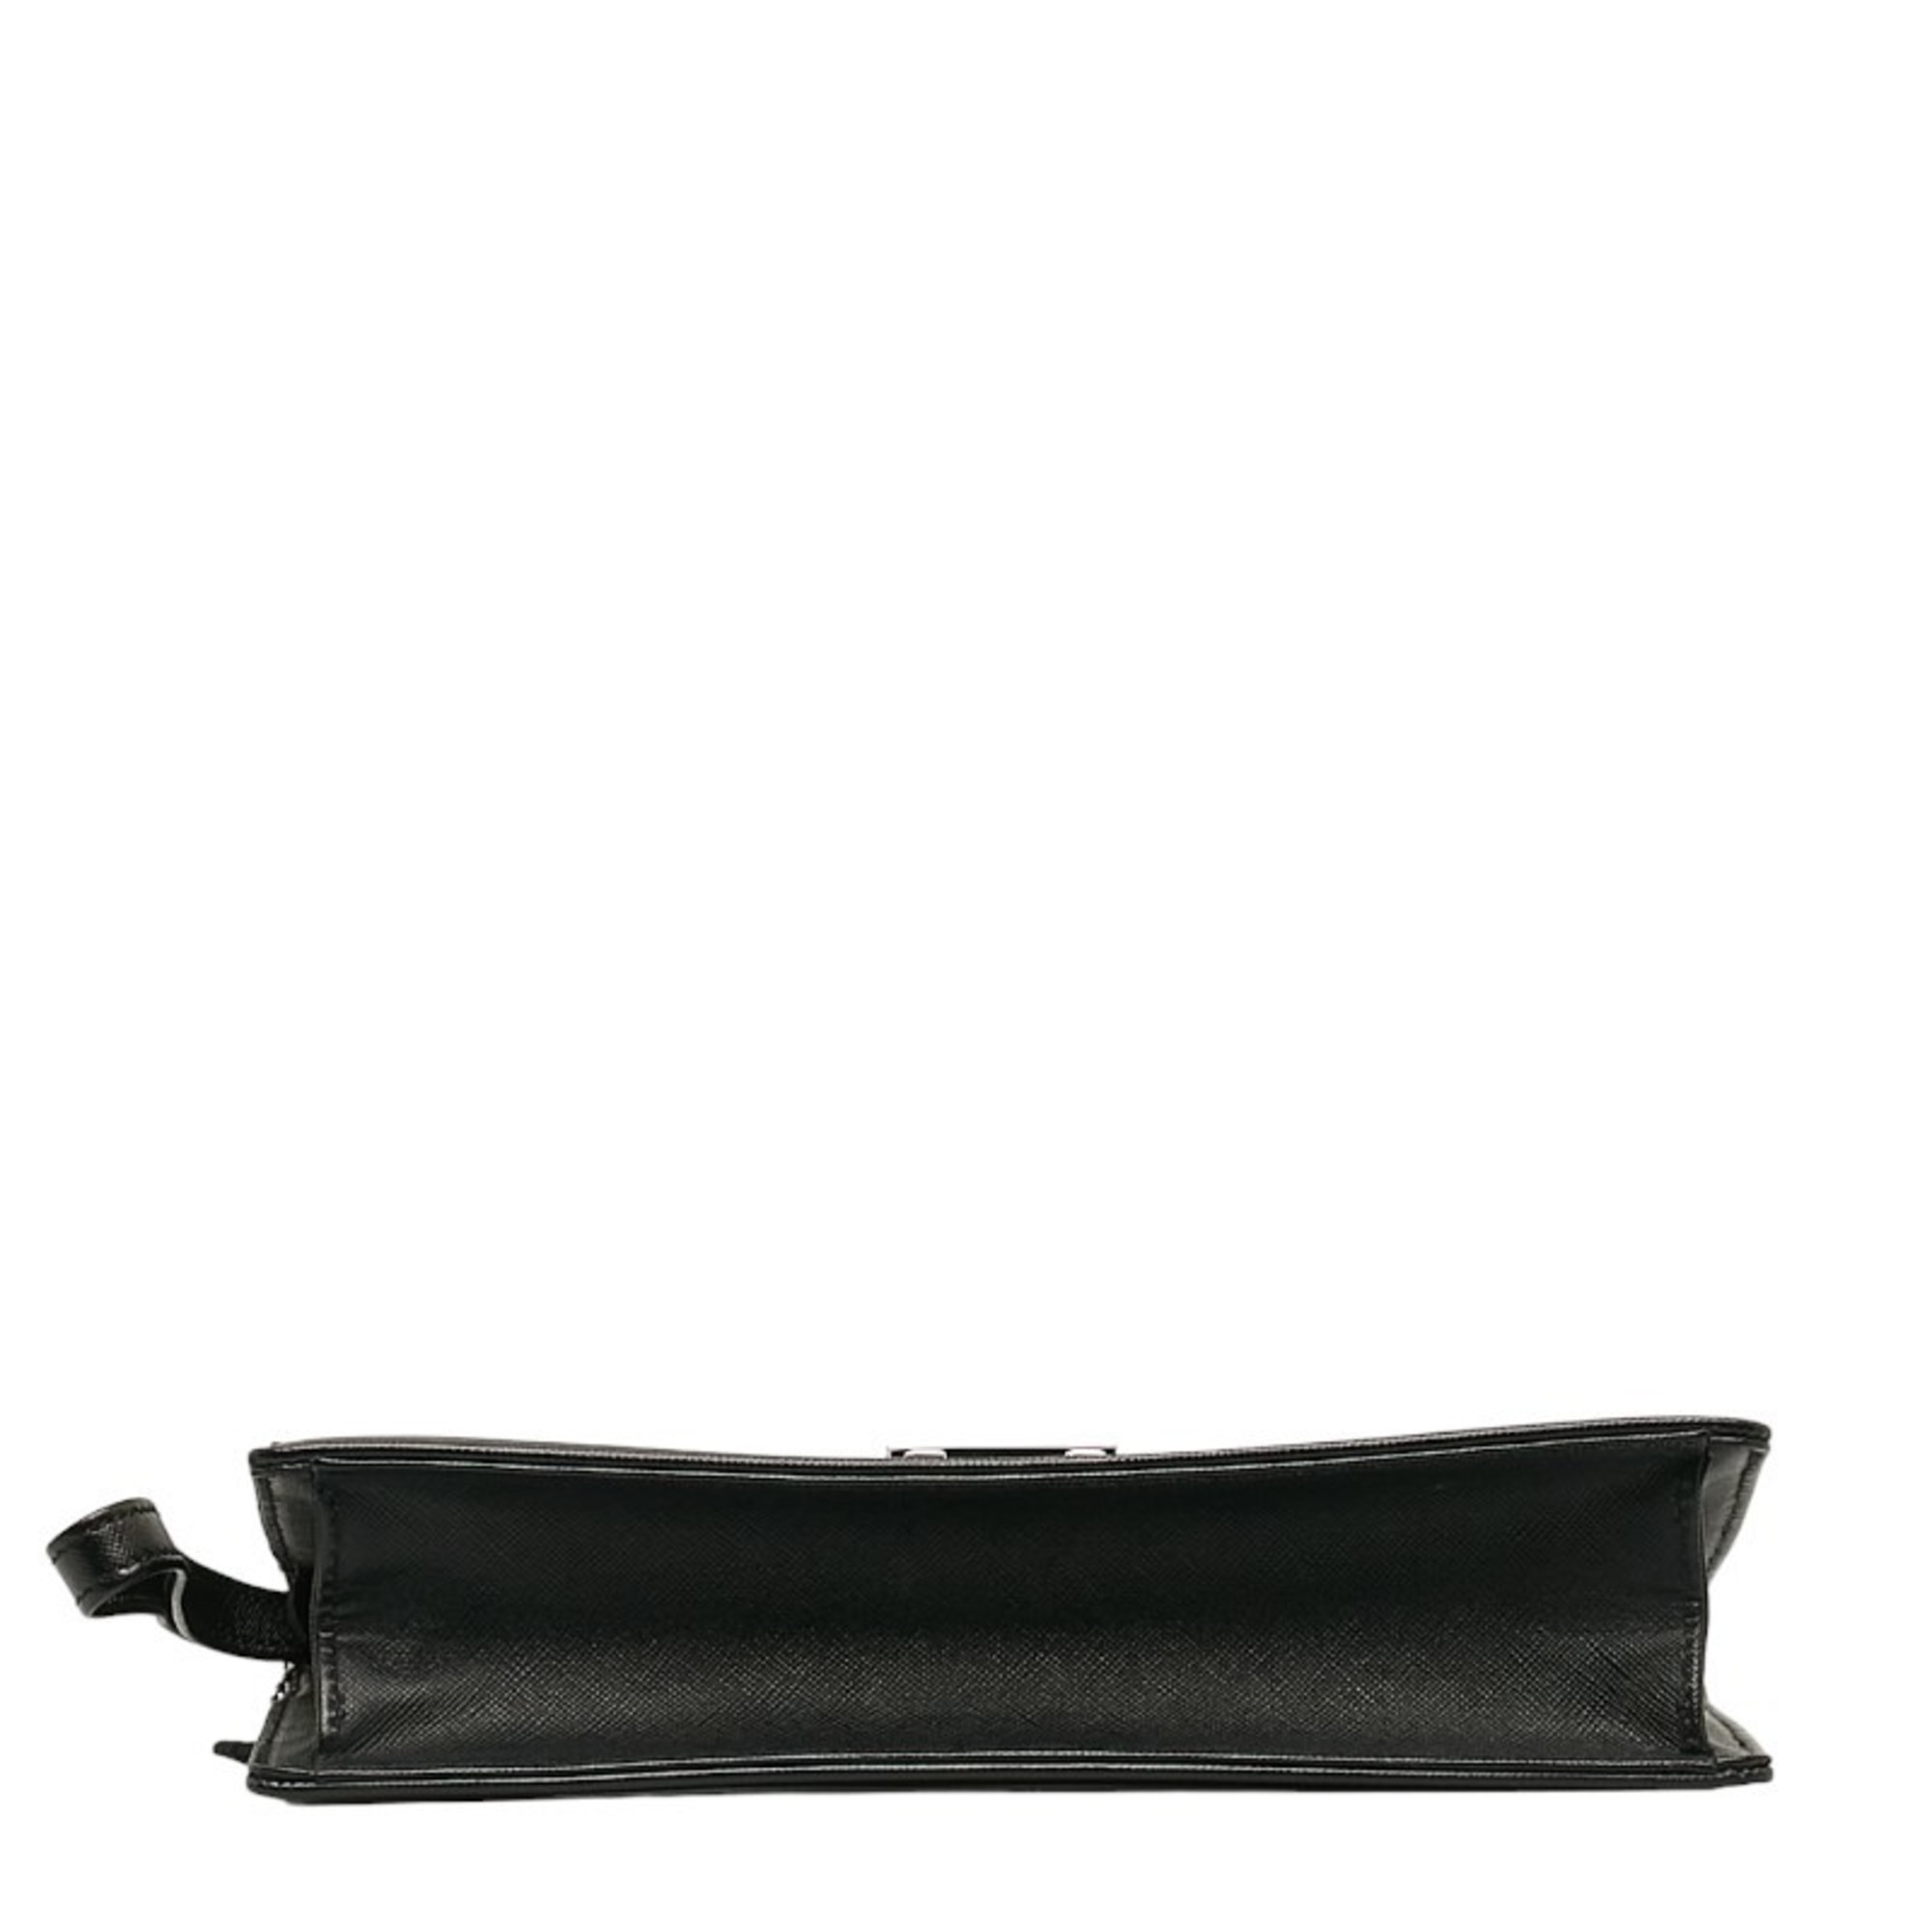 Burberry Clutch Bag Second Black Leather Women's BURBERRY